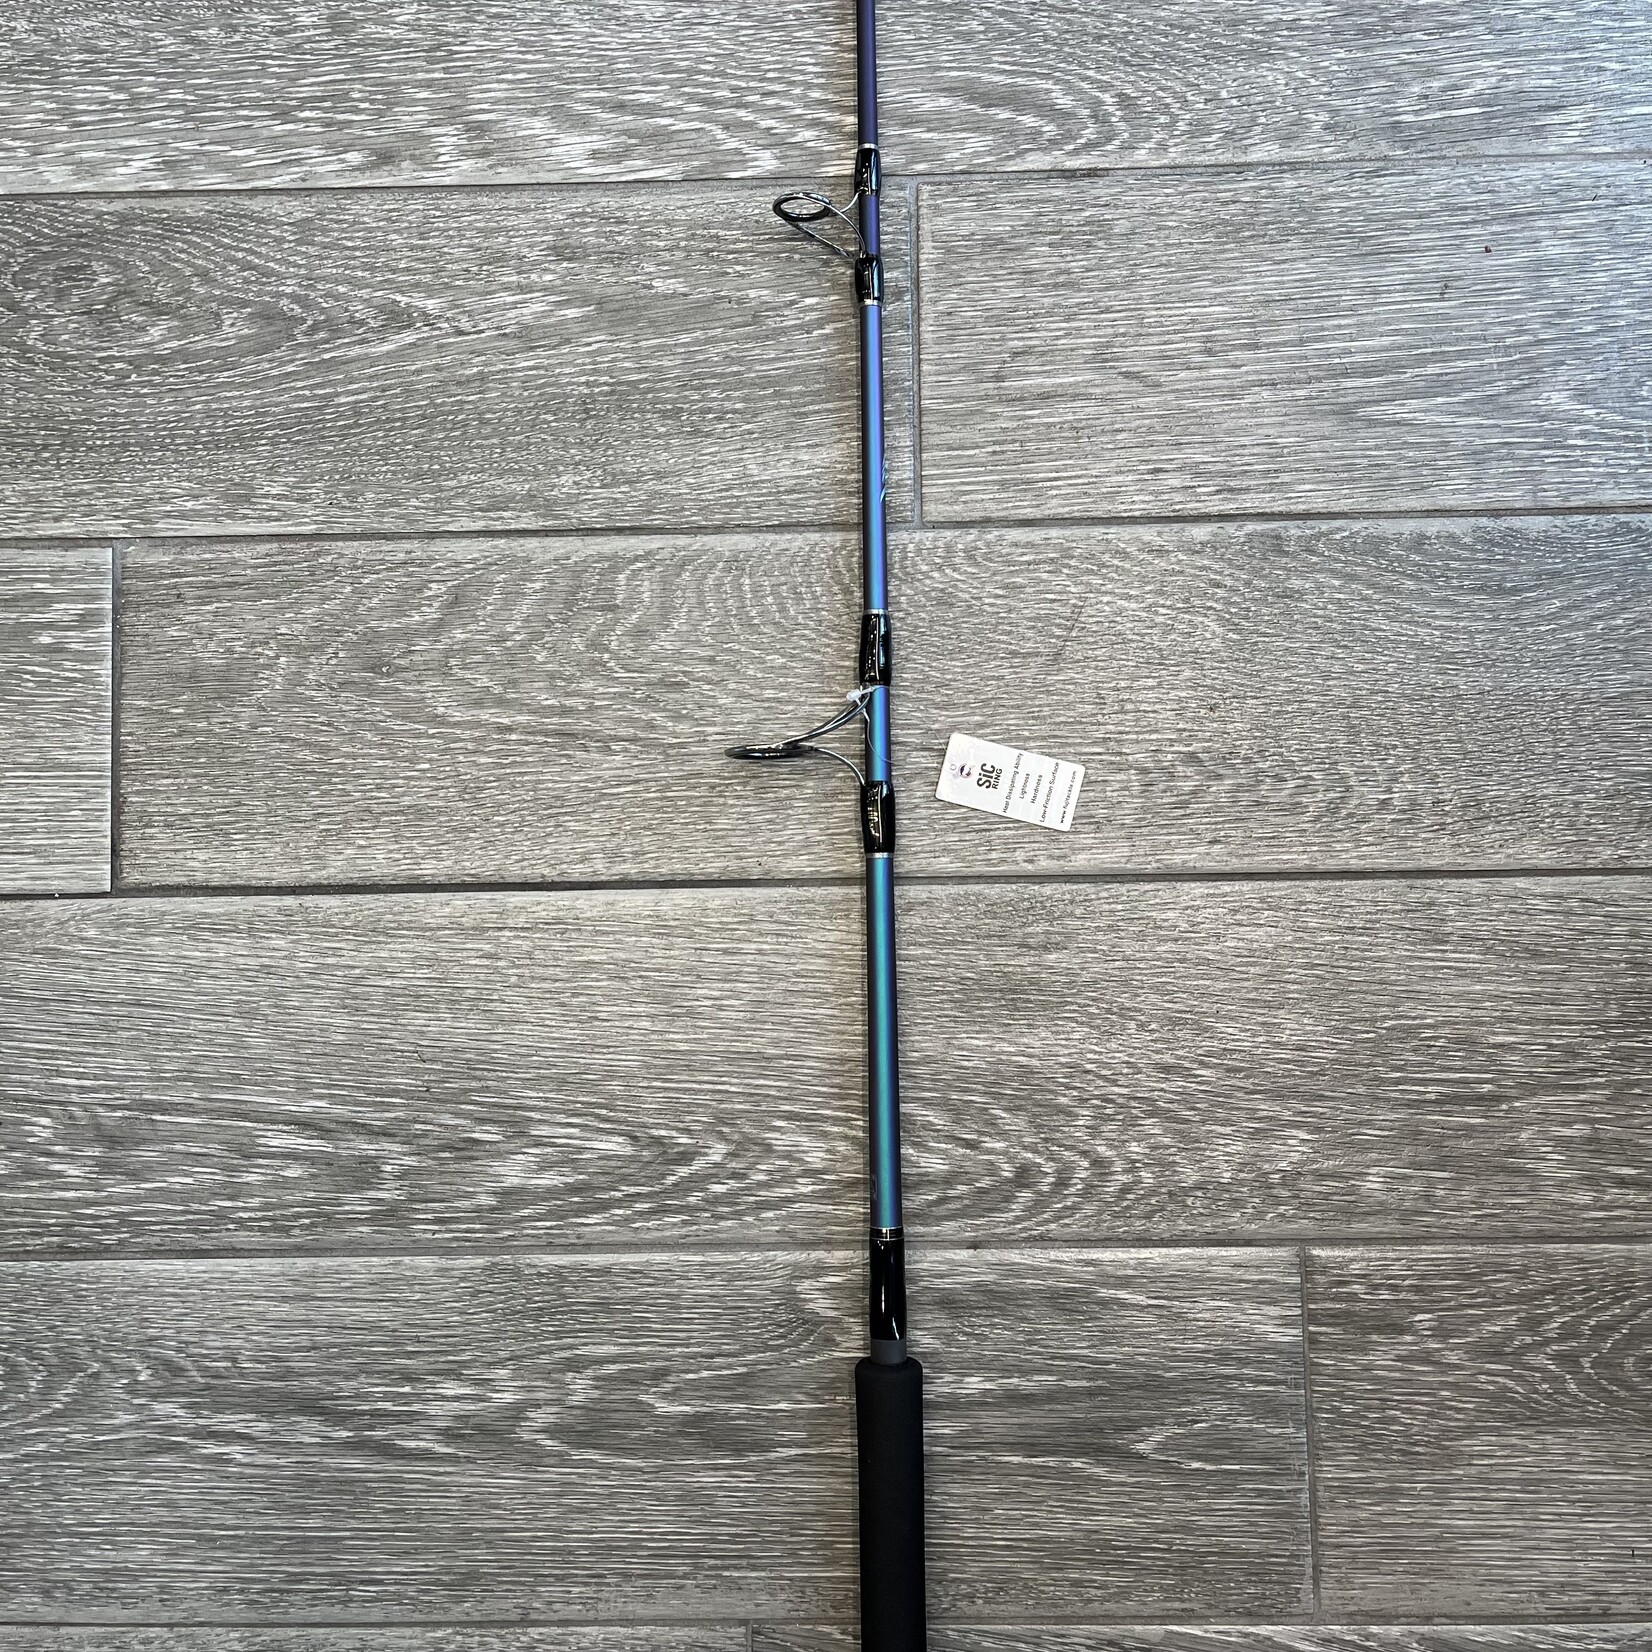 Temple Reef Temple Reef Monstro Spin Jigging Rod